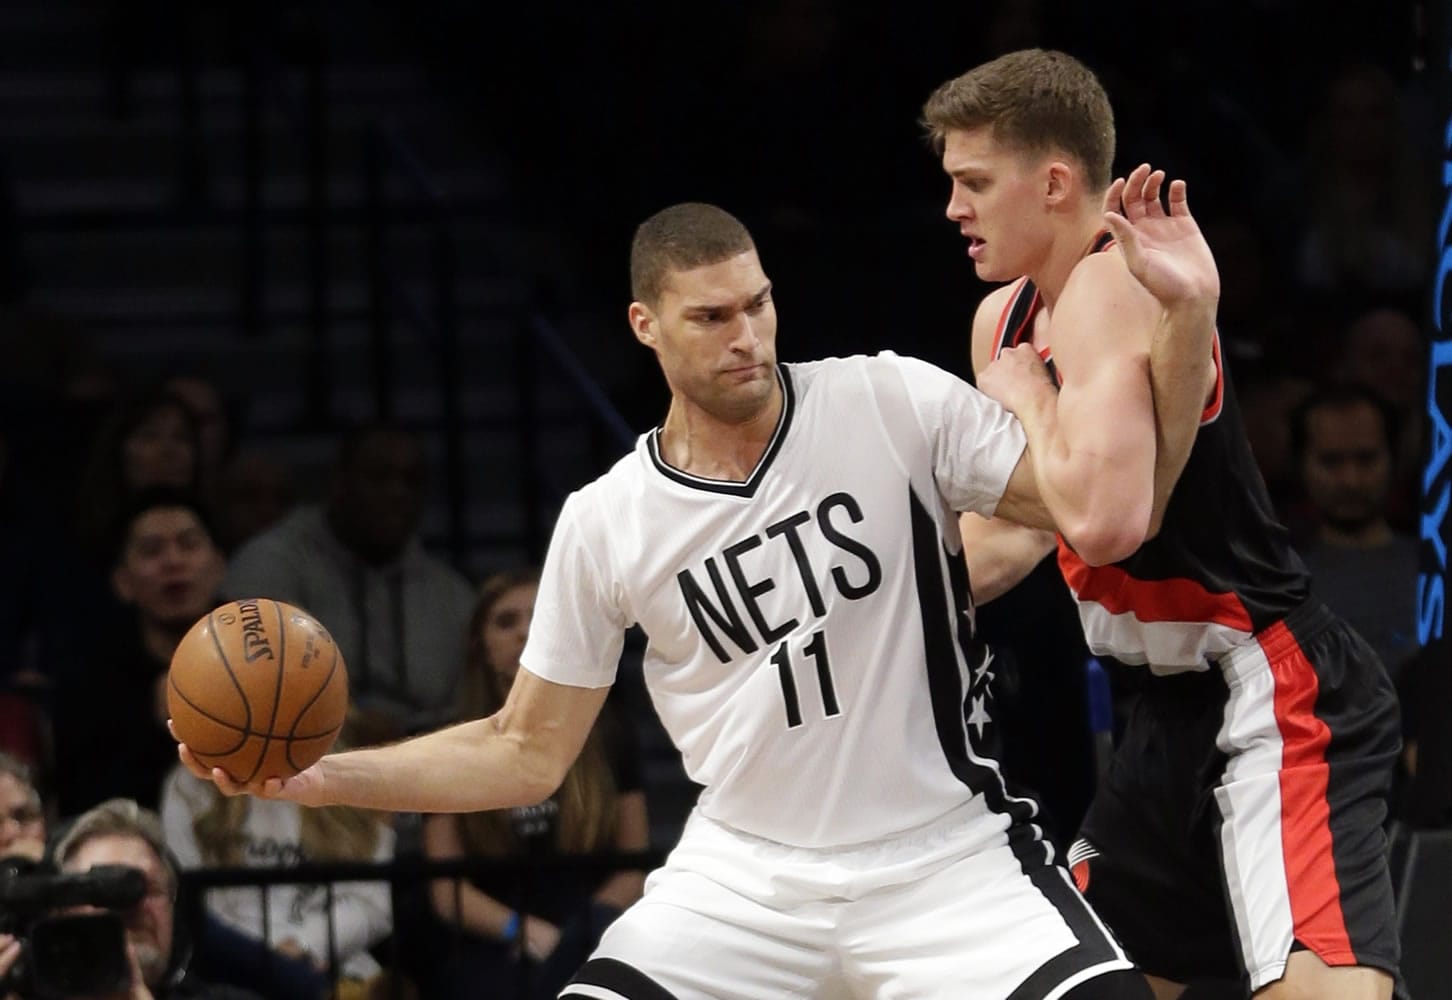 Portland Trail Blazers' Meyers Leonard, right, defends against Brooklyn Nets' Brook Lopez, left, during the first half of an NBA basketball game Friday, Jan. 15, 2016, in New York.